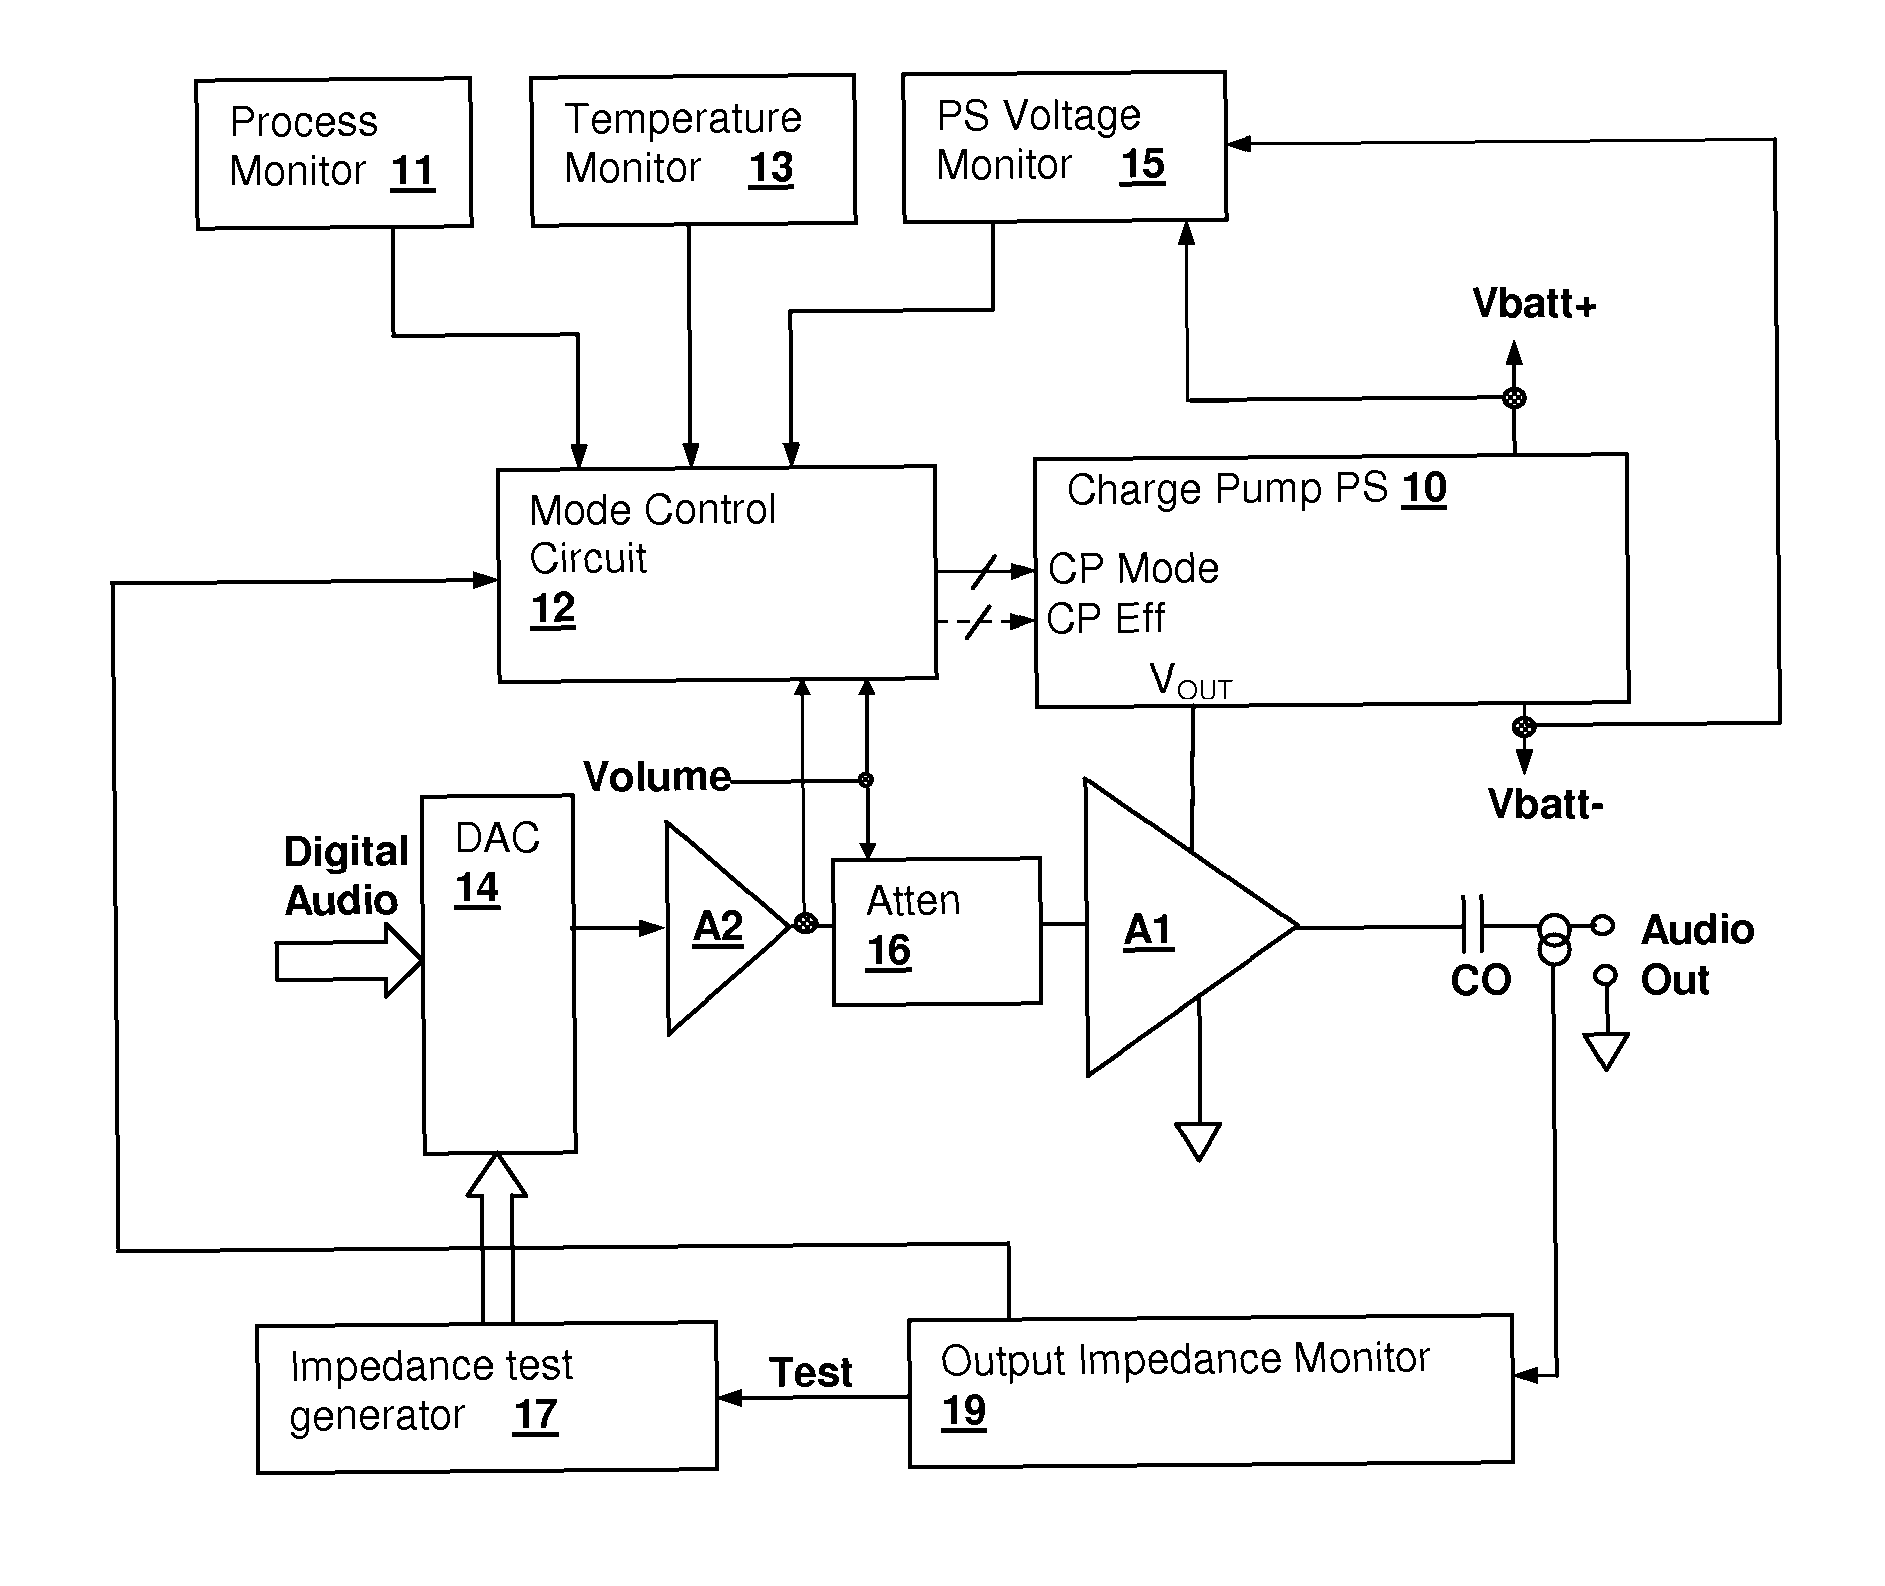 Operating environment and process position selected charge-pump operating mode in an audio power amplifier integrated circuit